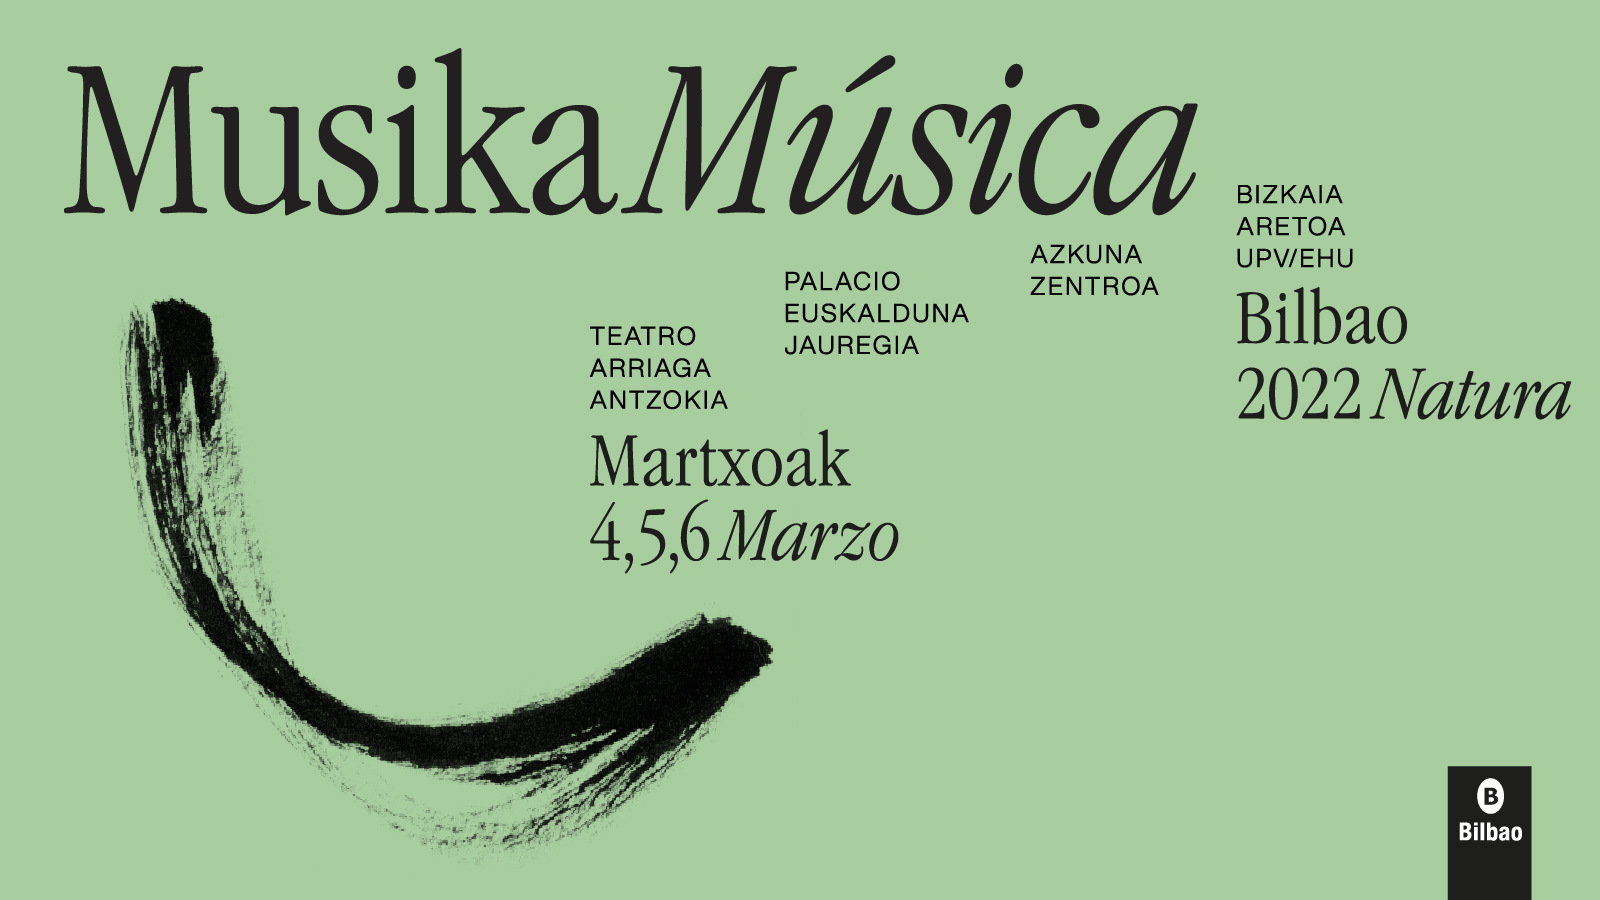 Lectures on film music at the 'Musika Música 2022' festival in Bilbao –  SoundTrackFest